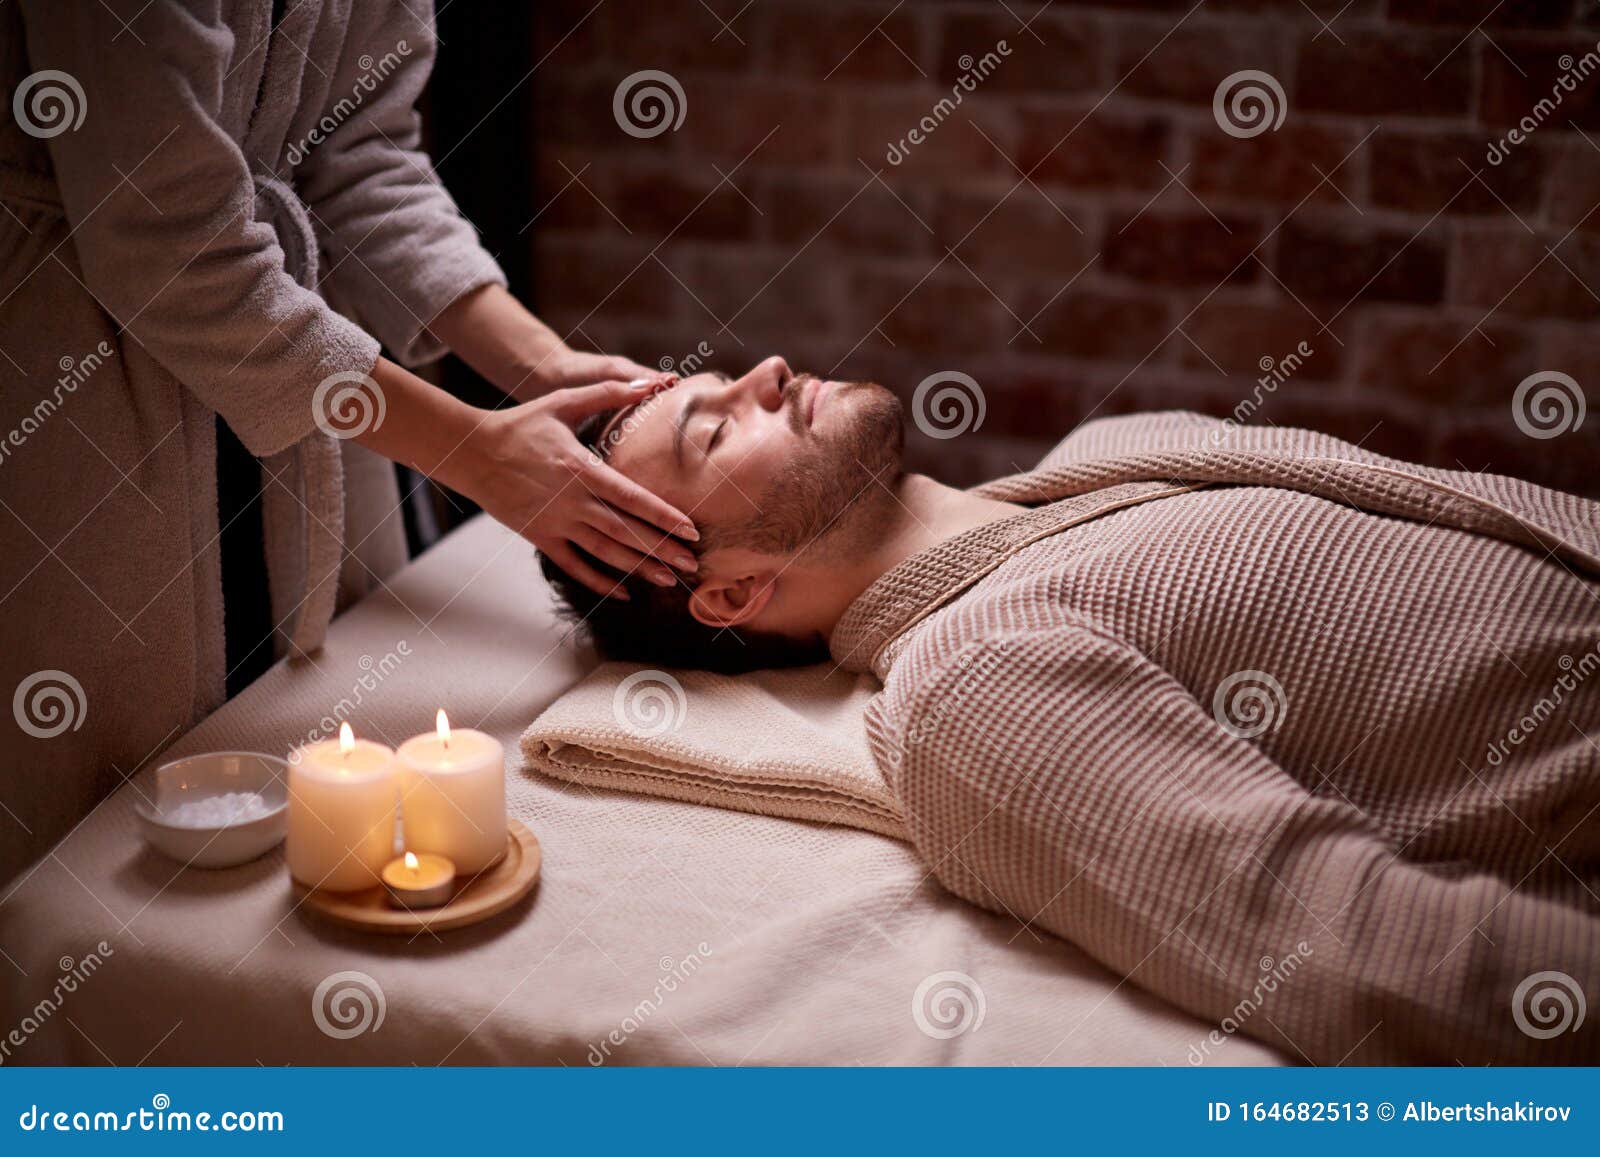 Man Getting Face Massage In Spa Beauty Salon Stock Image Image Of